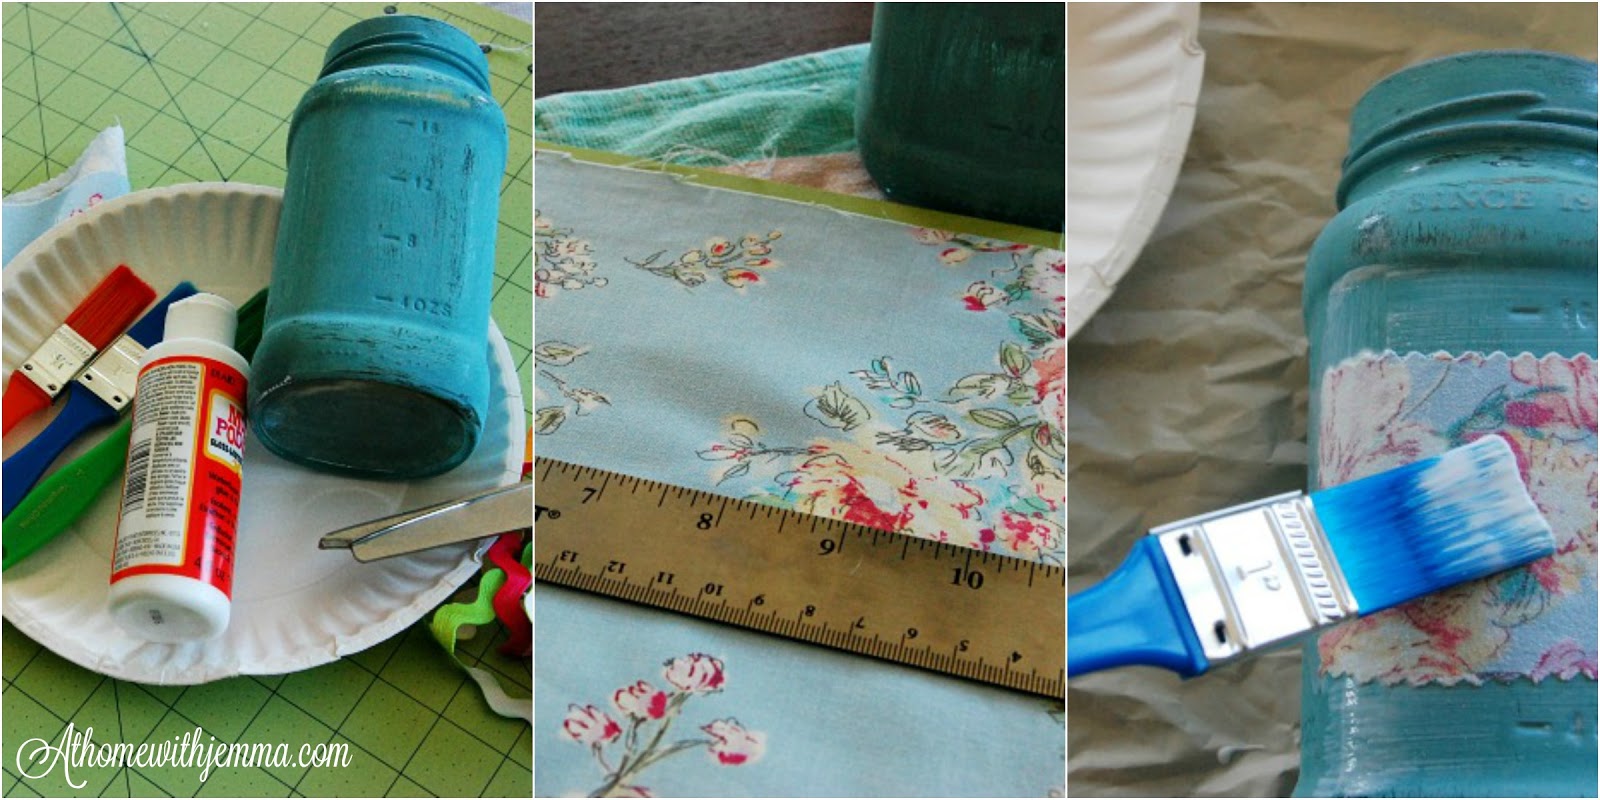 Tutorial- Making Mod Podge Spice Jars with Fabric Scraps - Hello